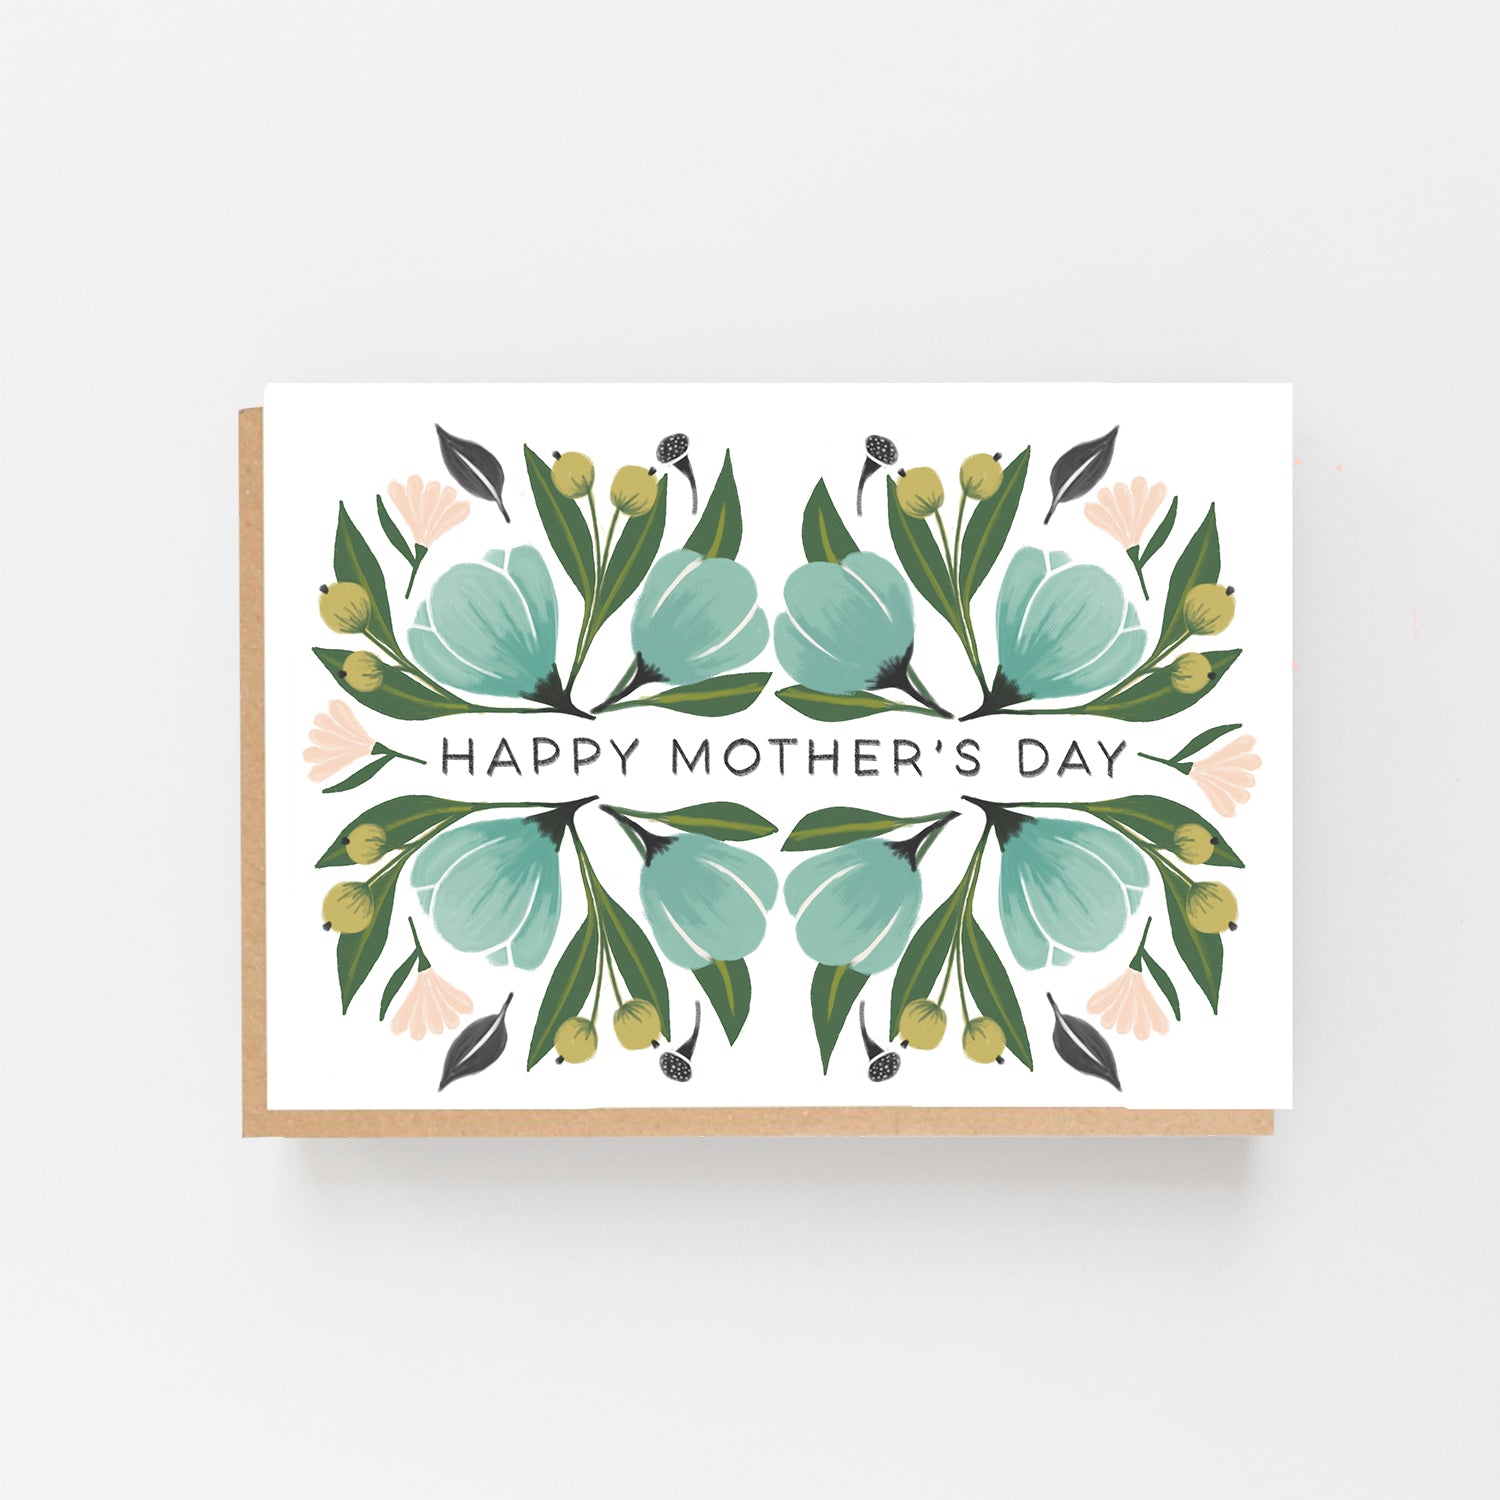 Happy Mother's Day - Floral Green